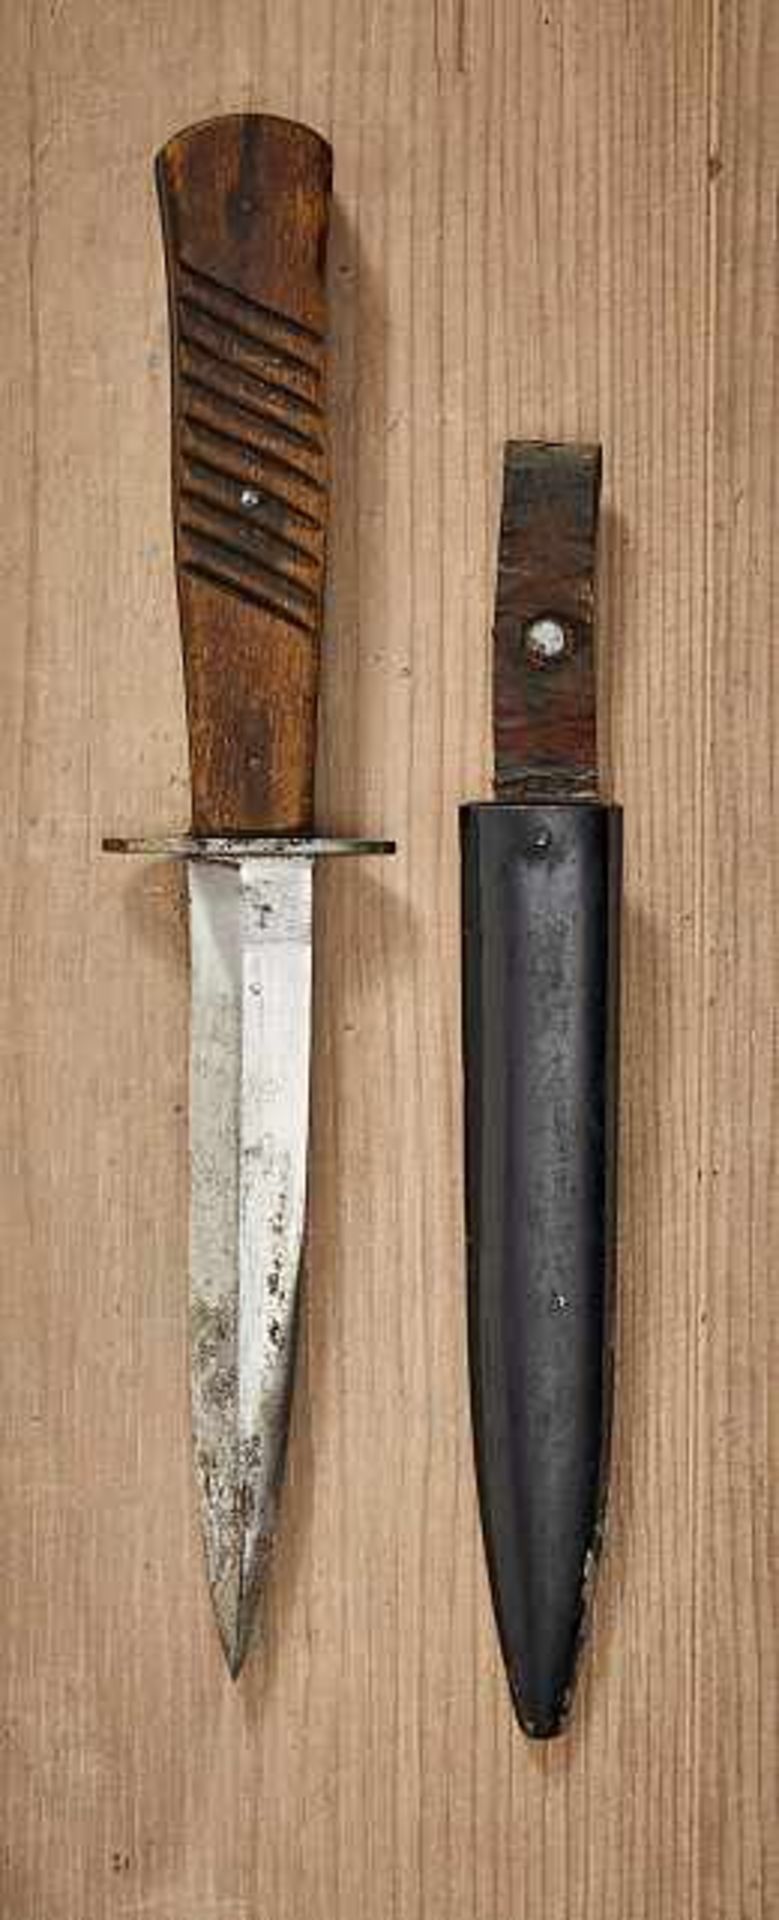 1.Weltkrieg : WWI Close Combat Knife.Unmarked. Hilt features grooved wooden grip with steel blade